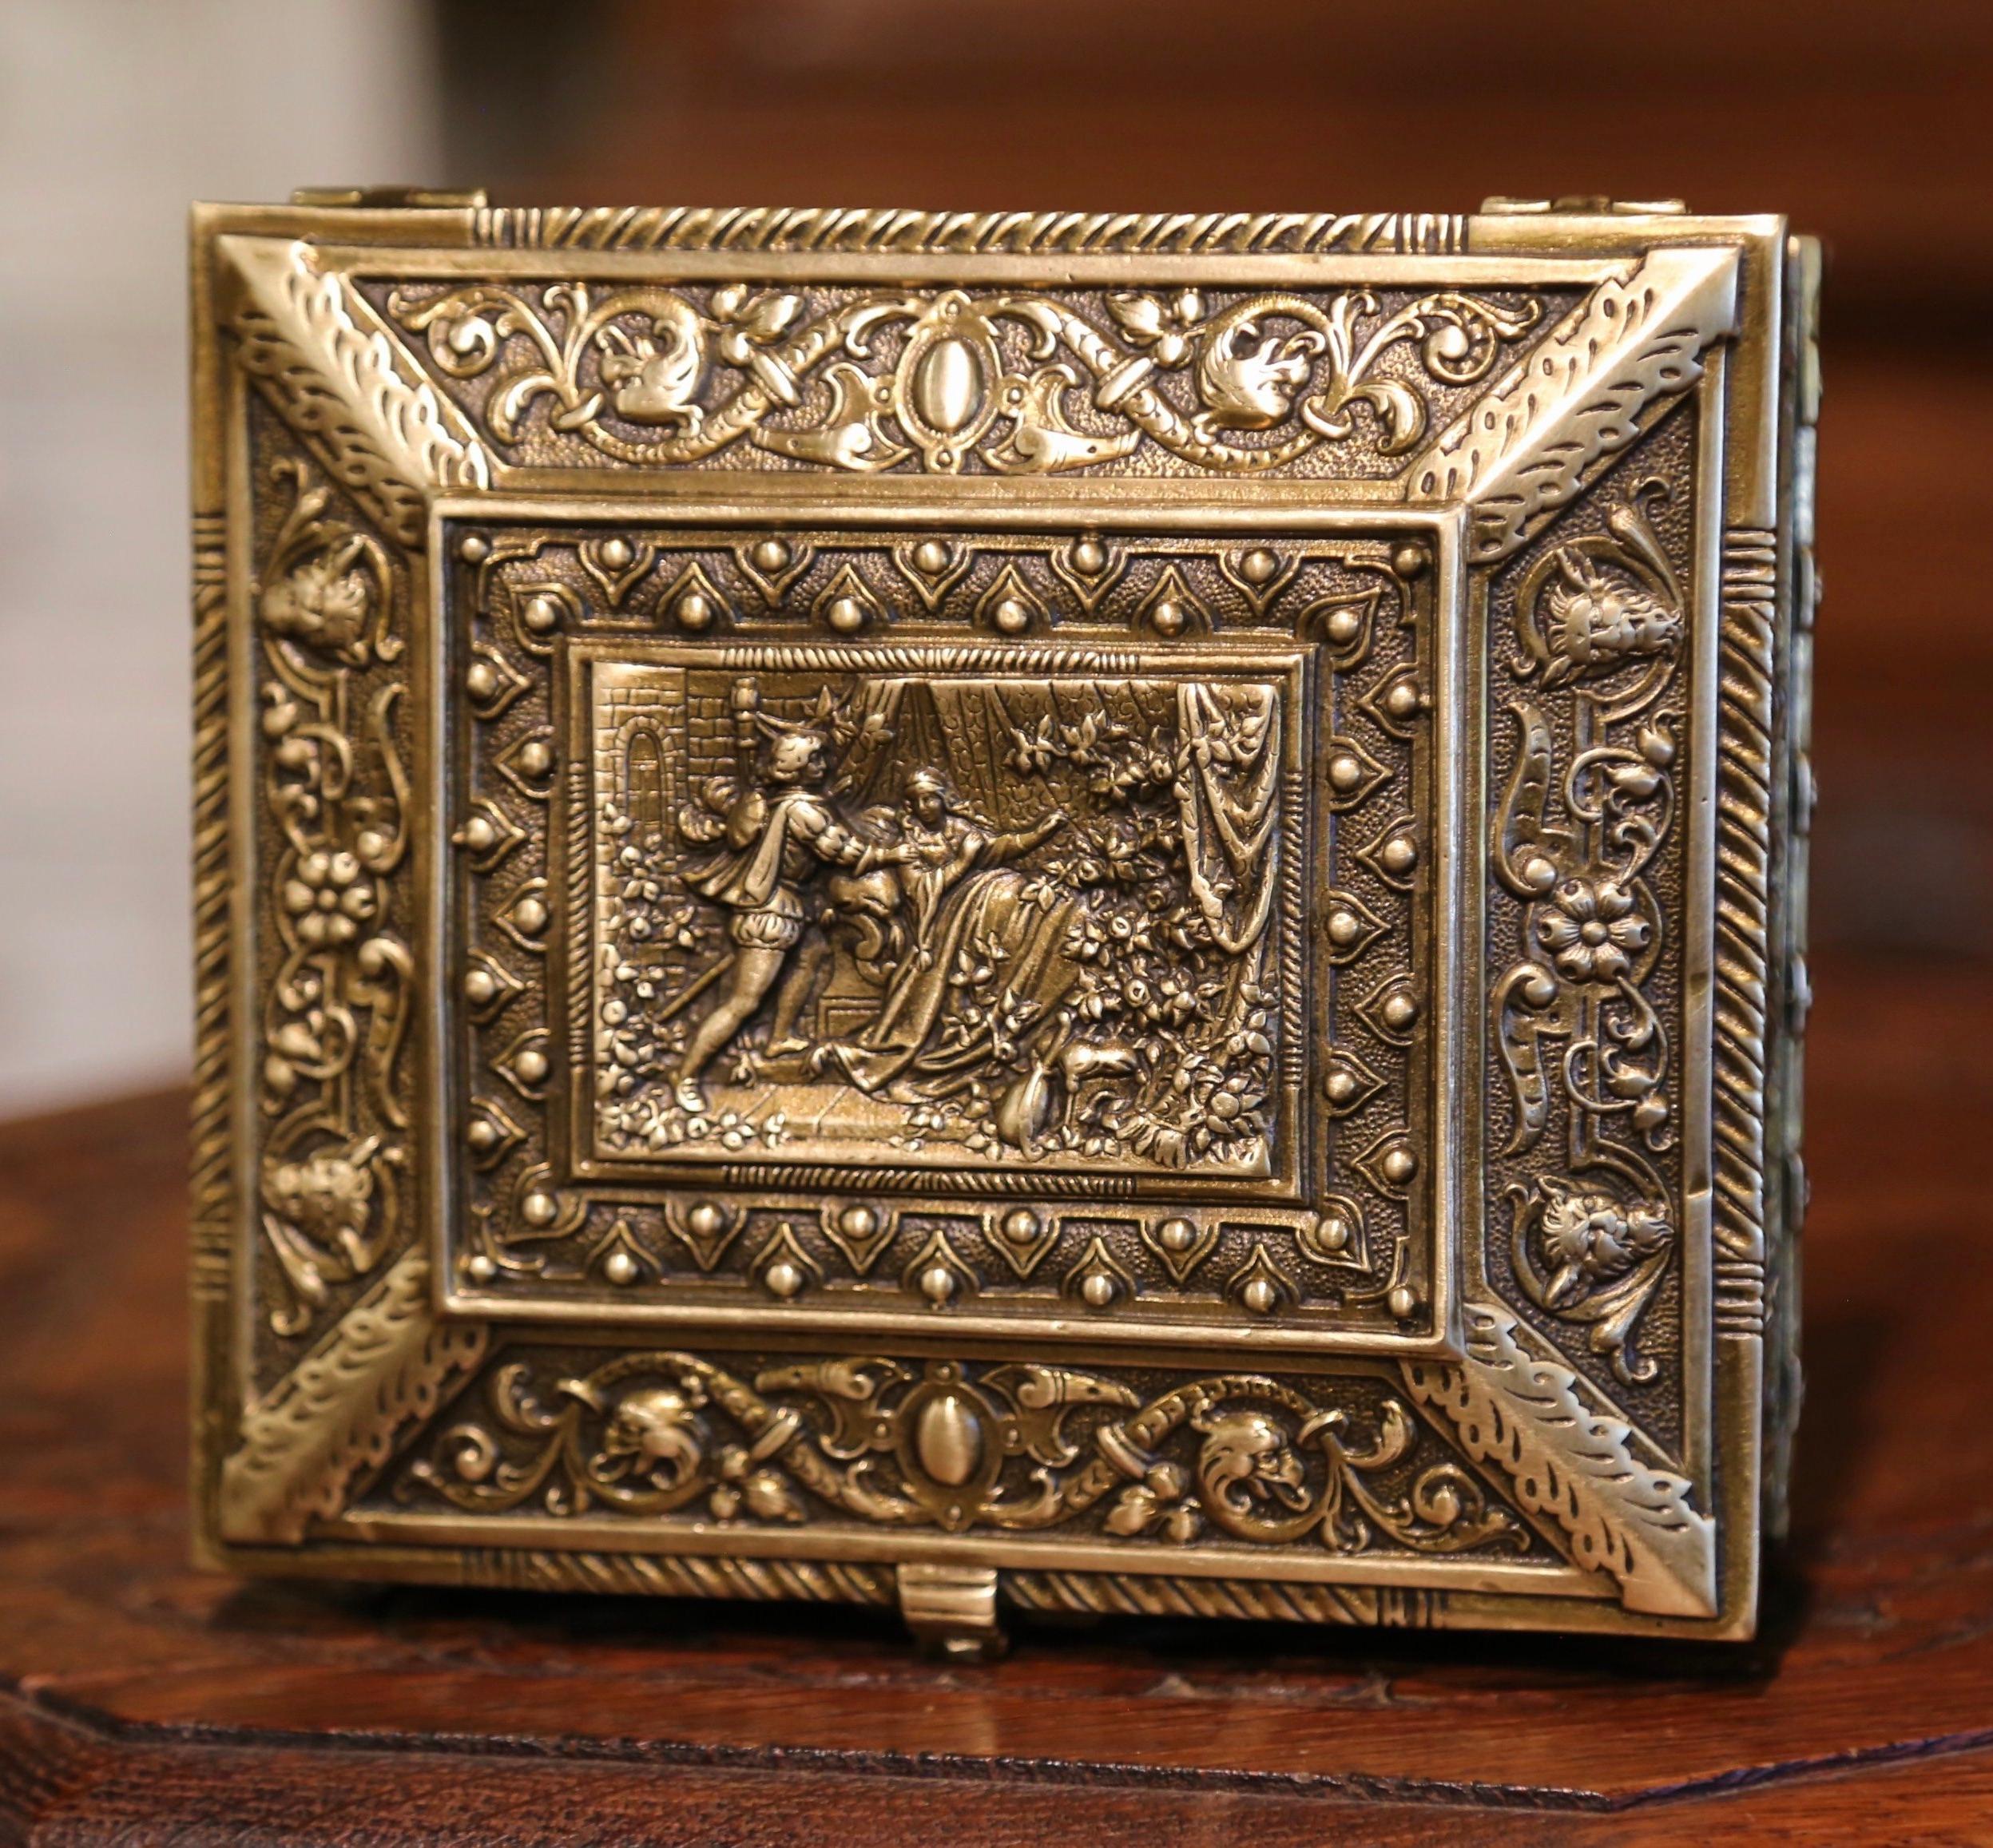 Renaissance 19th-Century Belgian Patinated Bronze Jewelry Box with Medieval Court Decor